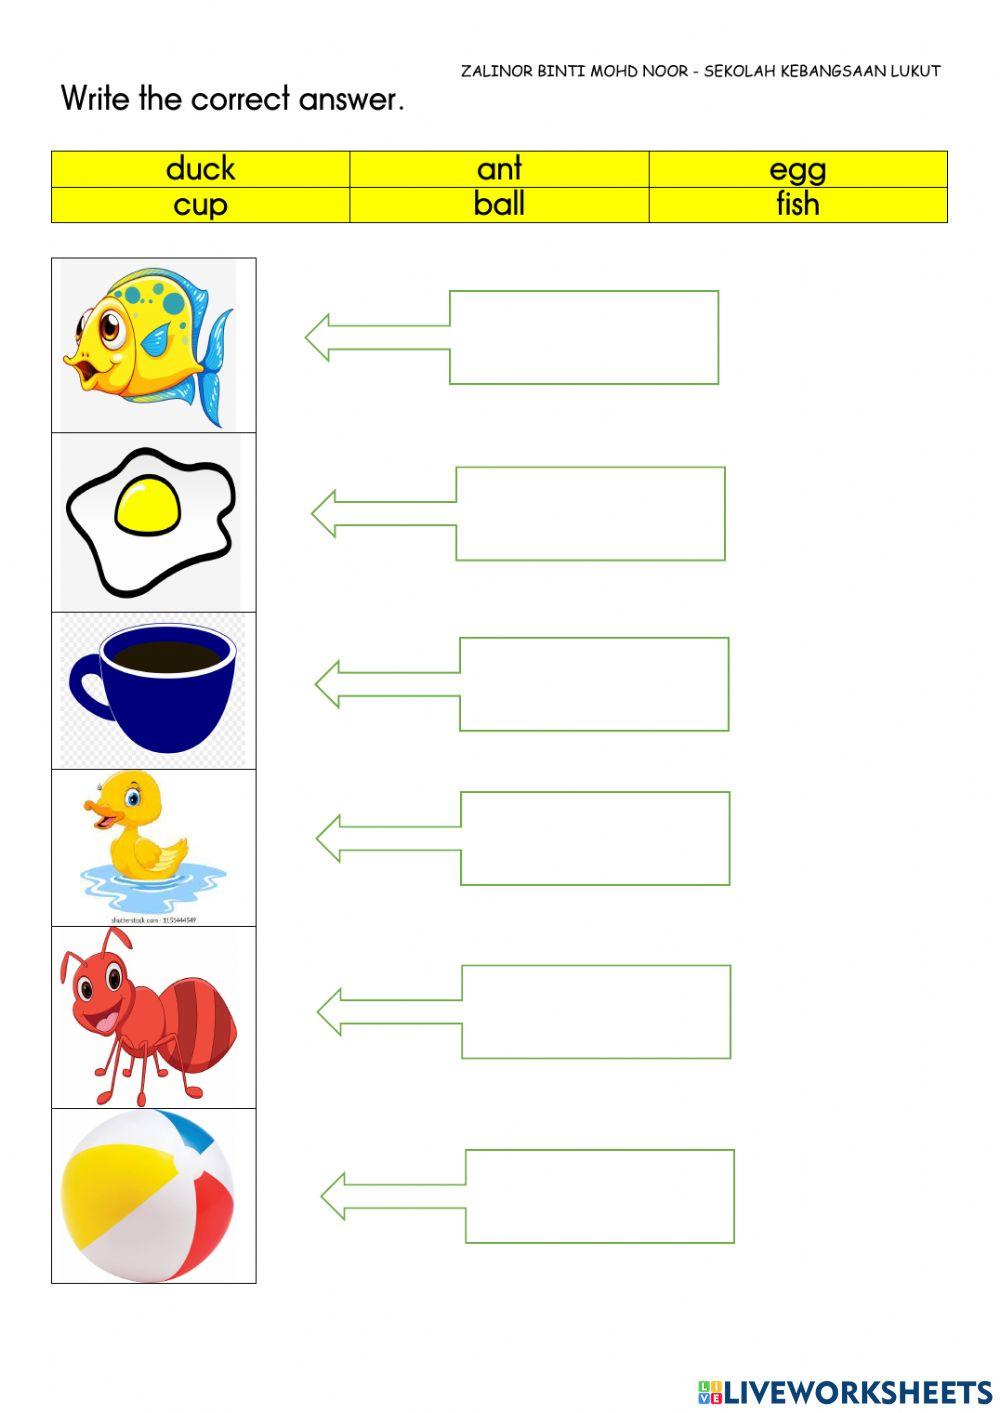 Things interactive activity for preschool | Live Worksheets